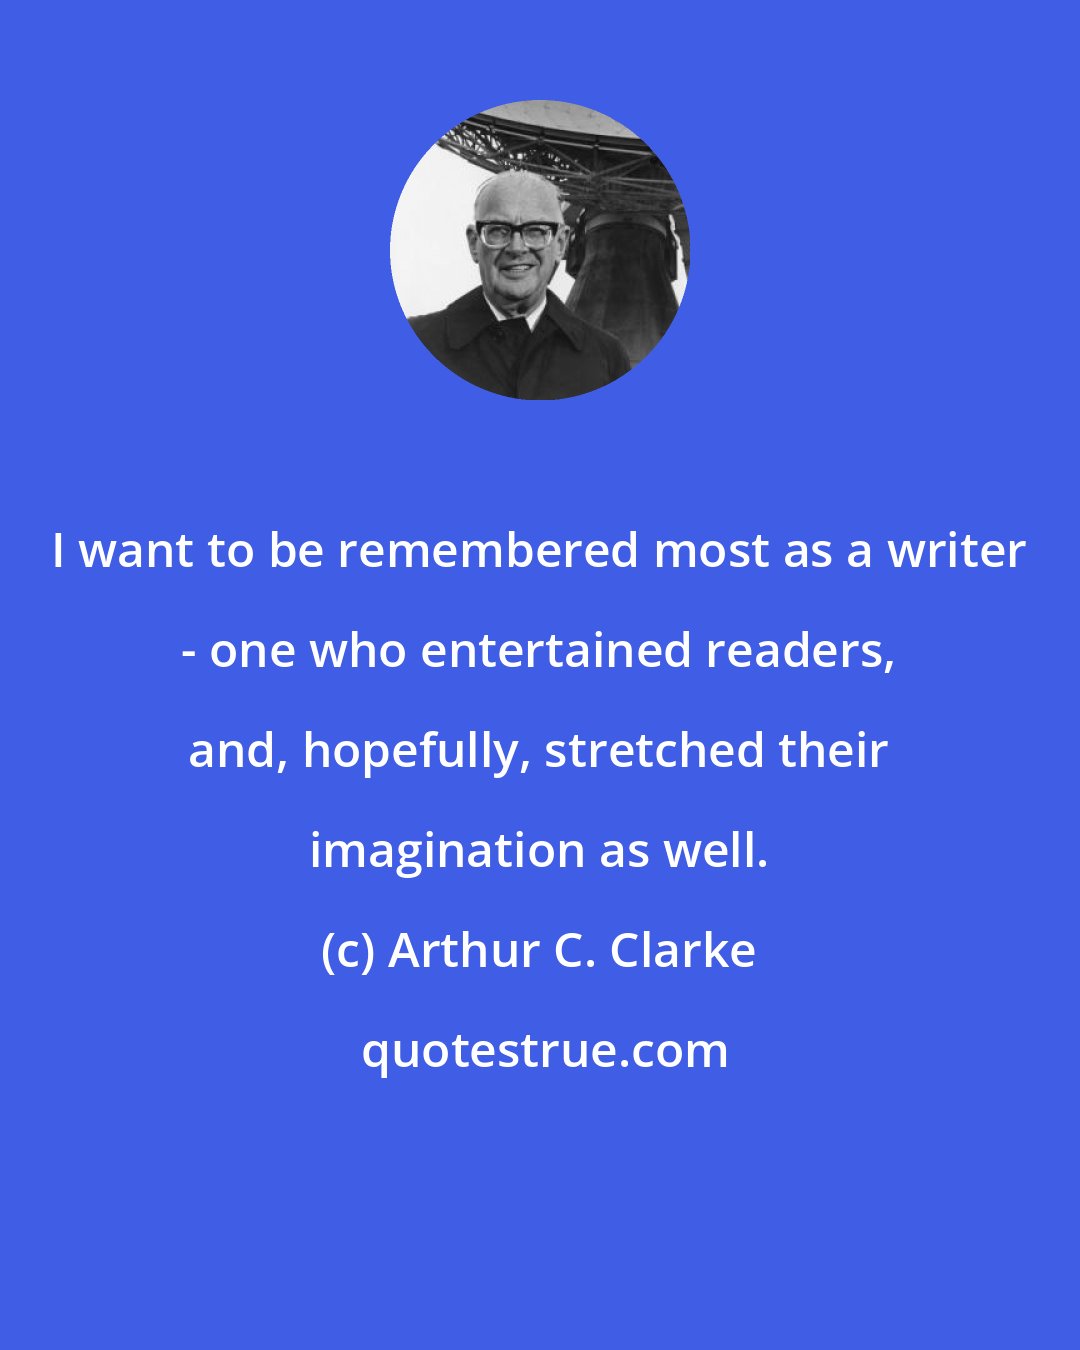 Arthur C. Clarke: I want to be remembered most as a writer - one who entertained readers, and, hopefully, stretched their imagination as well.